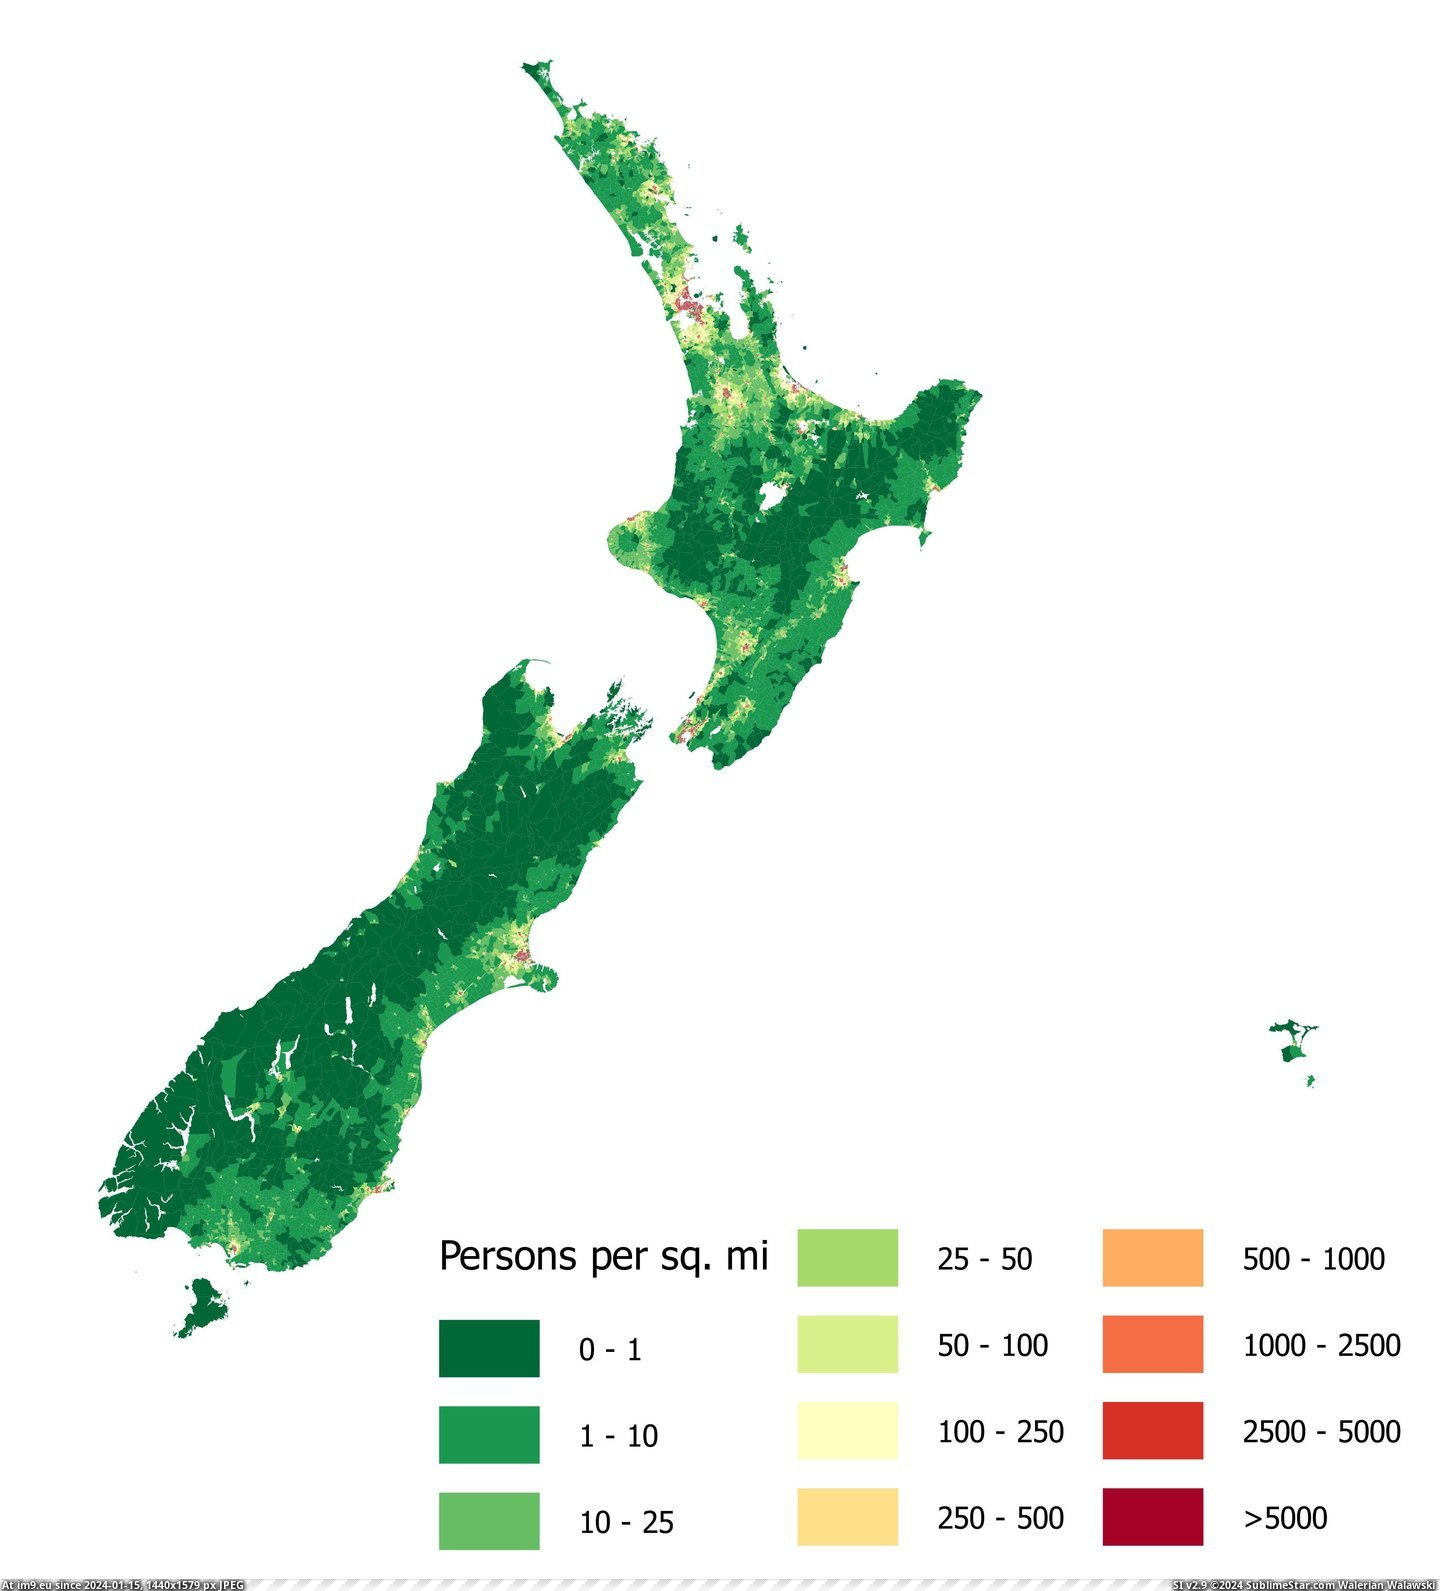 #Population #Zealand #Mesh #Density #Census [Mapporn] Population Density of New Zealand by Census Mesh Block  [3937x4330] Pic. (Image of album My r/MAPS favs))